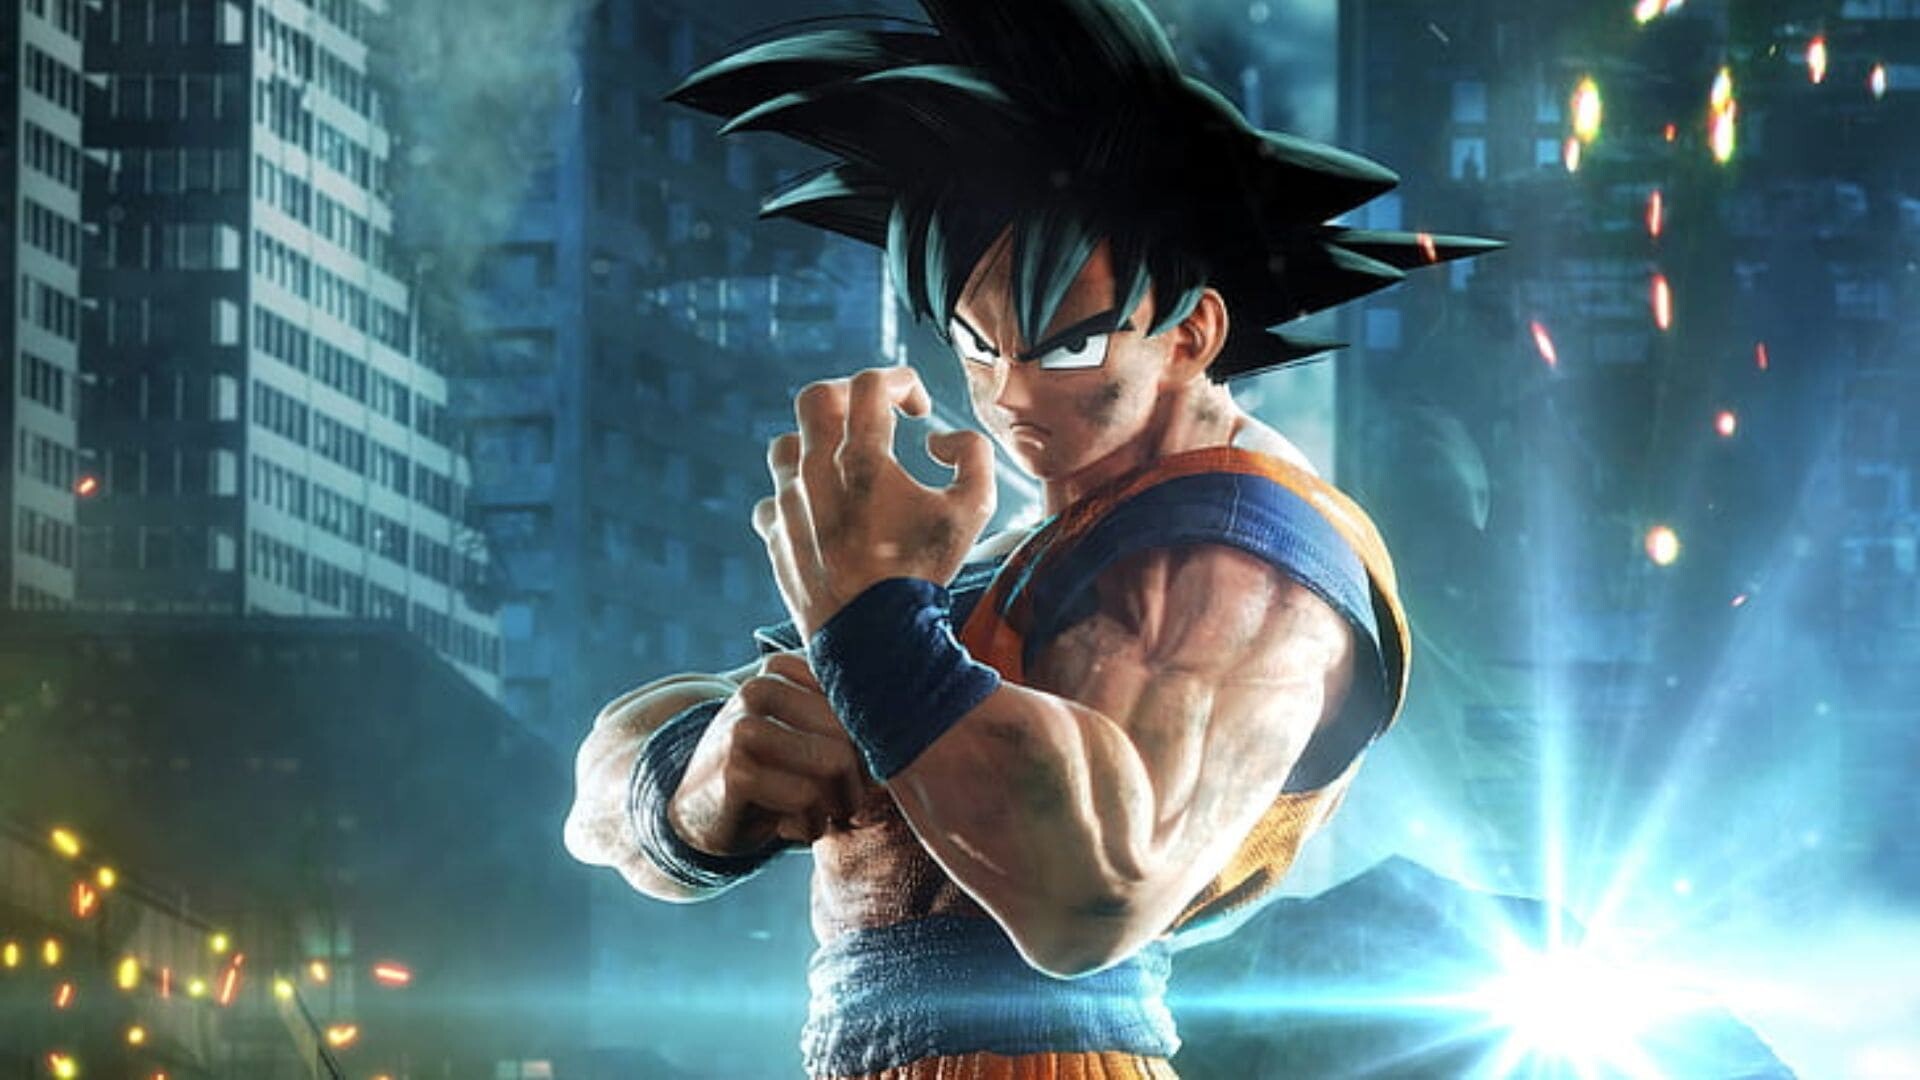 Goku: A character in the Dragon Ball media franchise, The grandest fighters of animanga. 1920x1080 Full HD Background.